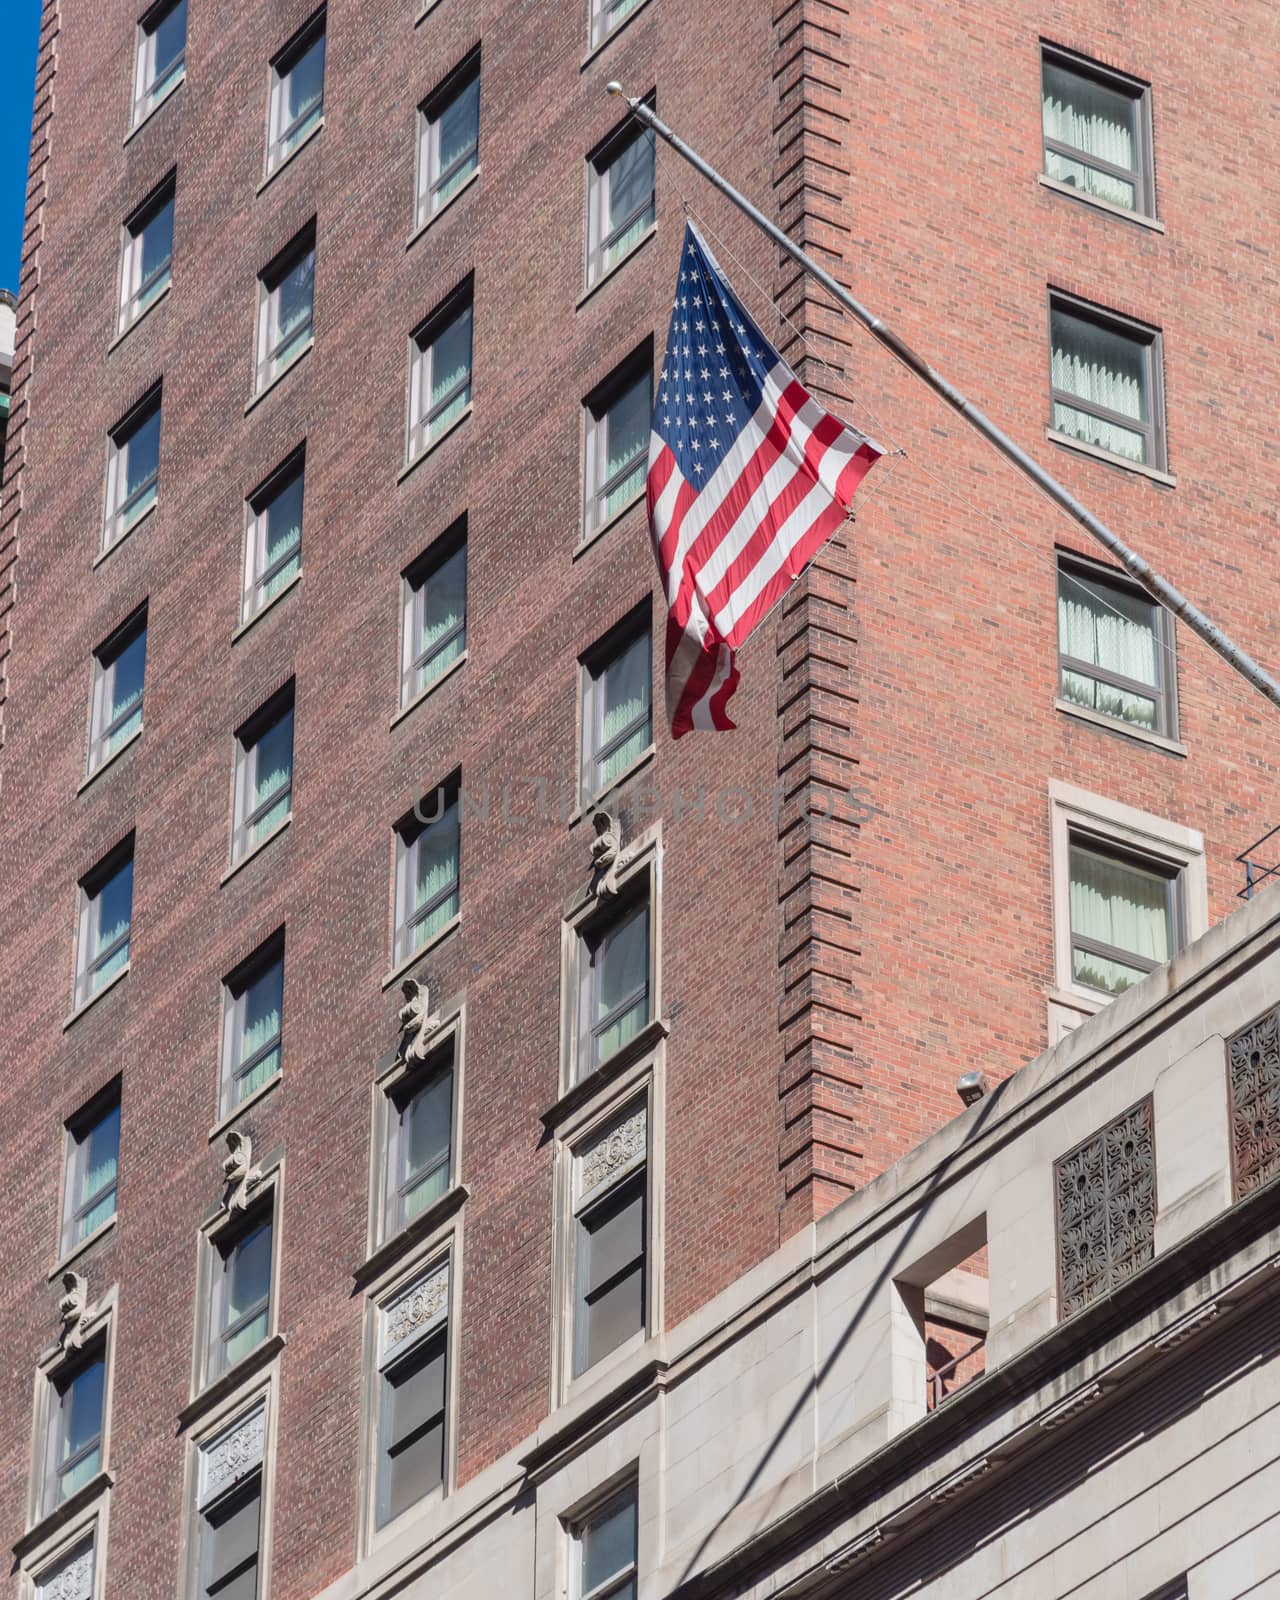 Proudly display of American flag outside of government building near Union Station in downtown Chicago, Illinois. Flying stars and stripes flag with historical brick building facade background